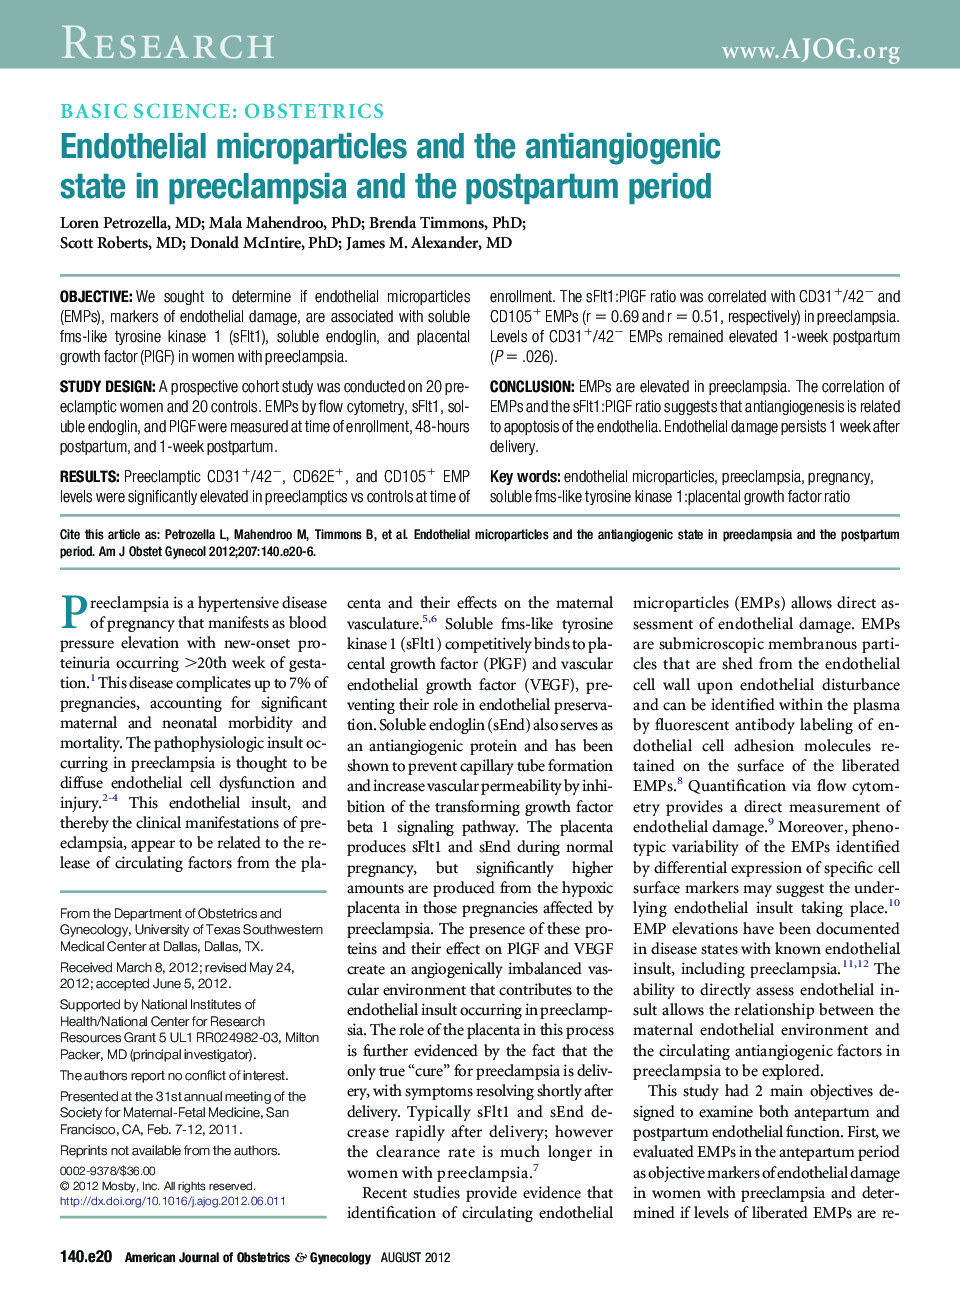 Endothelial microparticles and the antiangiogenic state in preeclampsia and the postpartum period